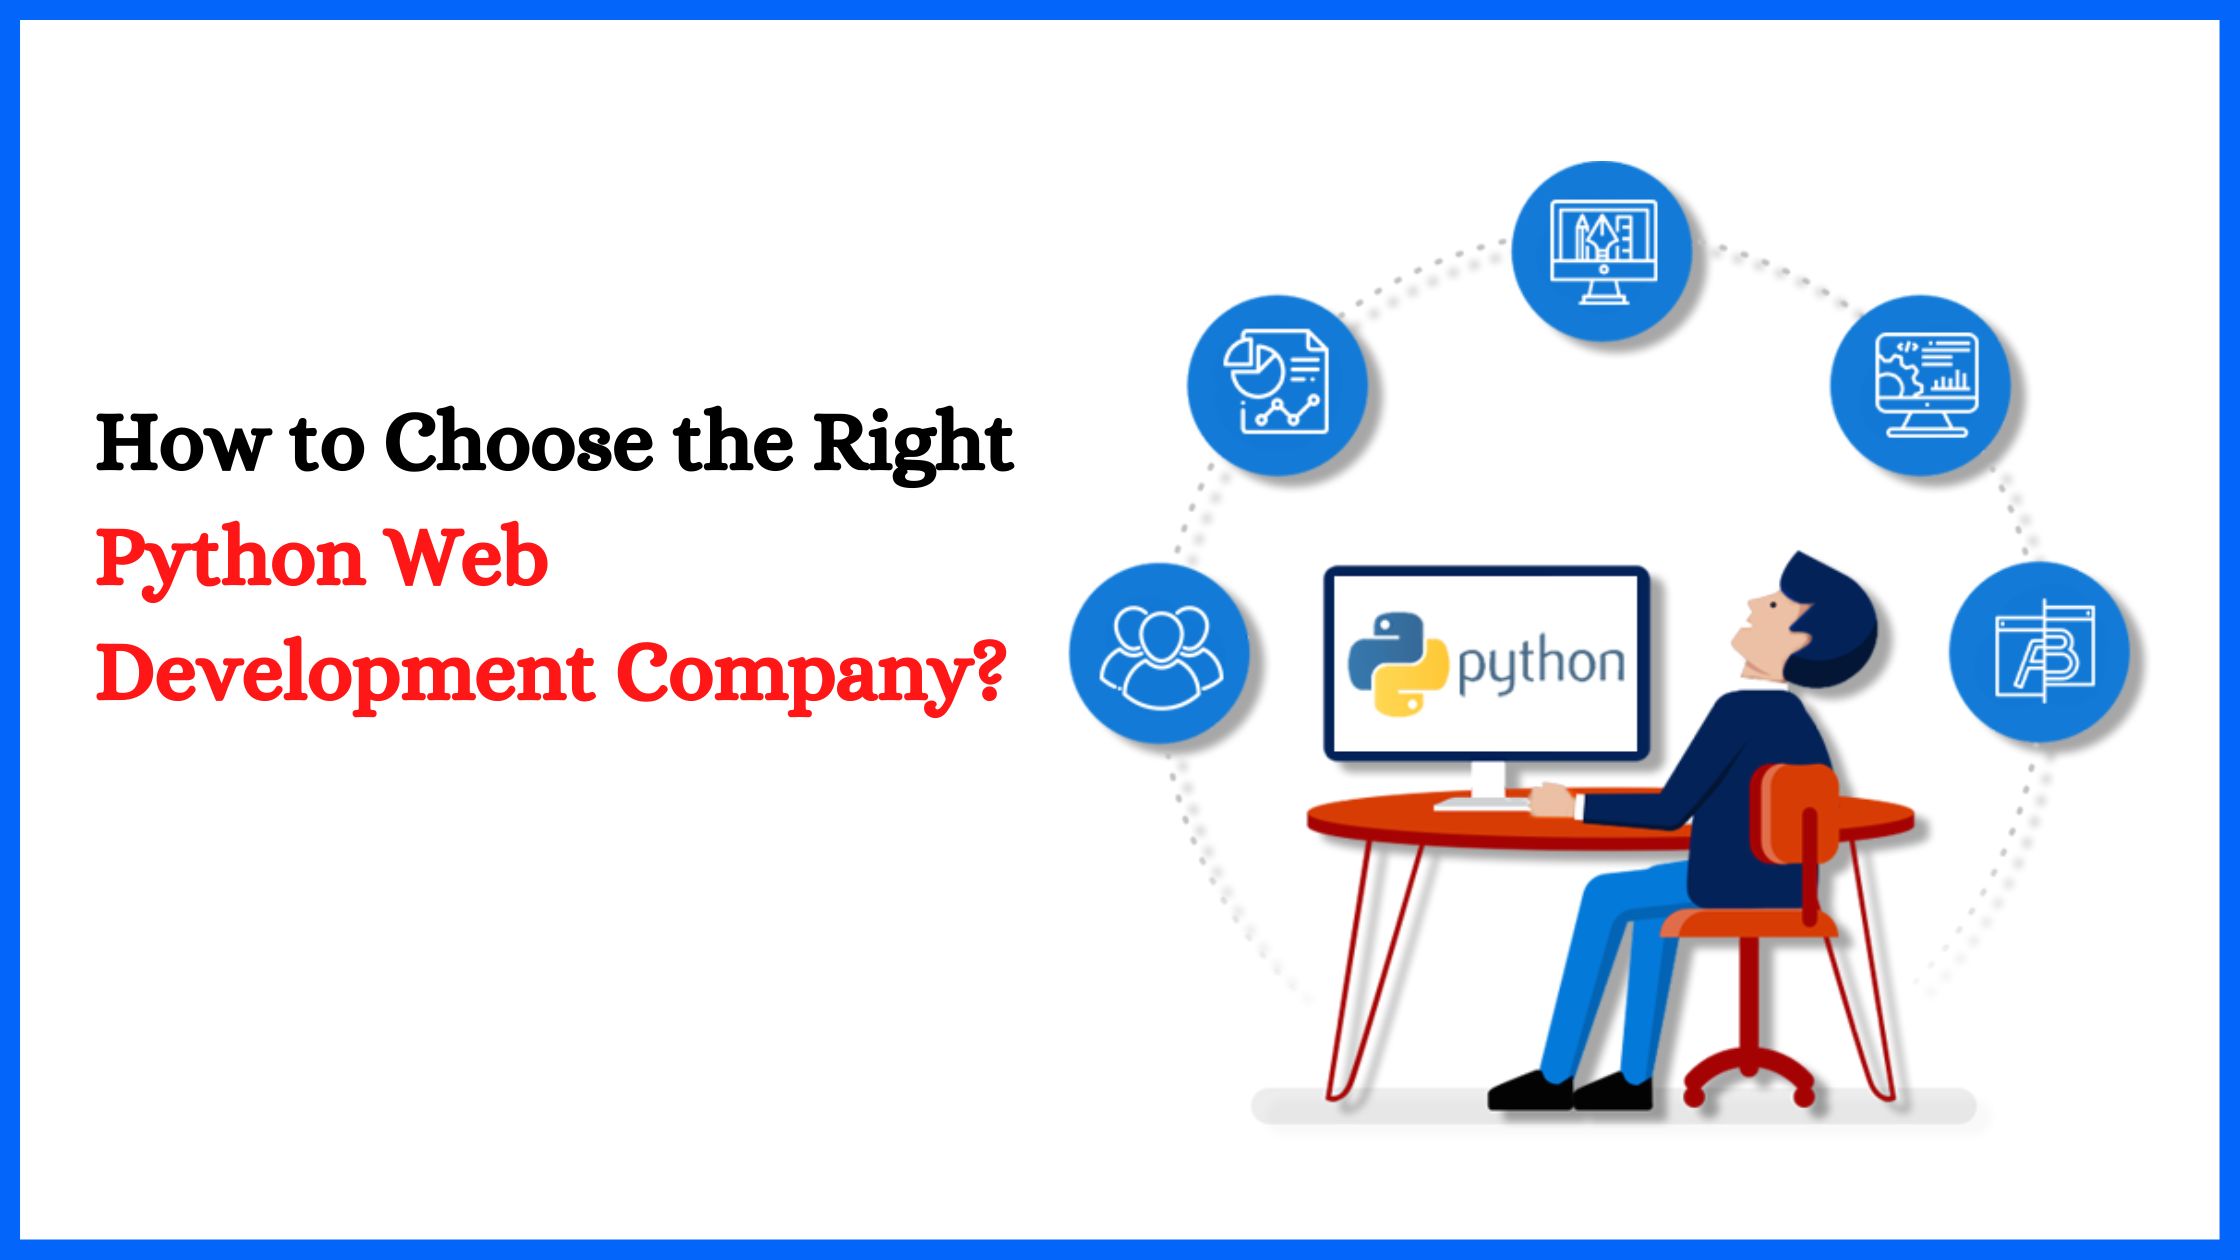 How to Choose the Right Python Web Development Company?